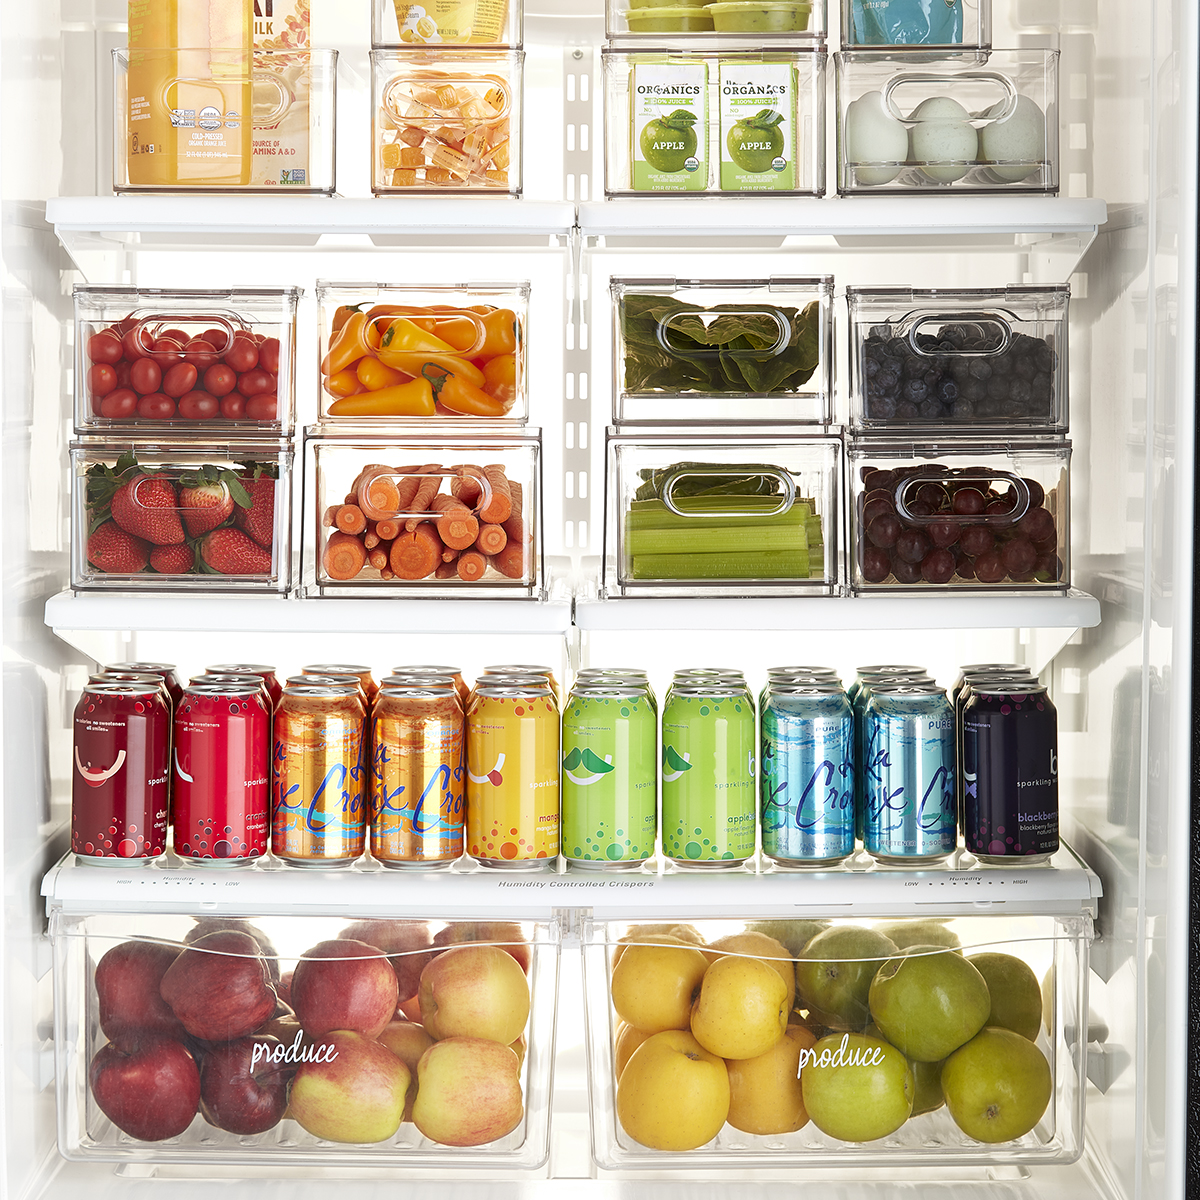 https://www.containerstore.com/catalogimages/390228/SU_20_THE-Inside-Fridge_RGB.jpg